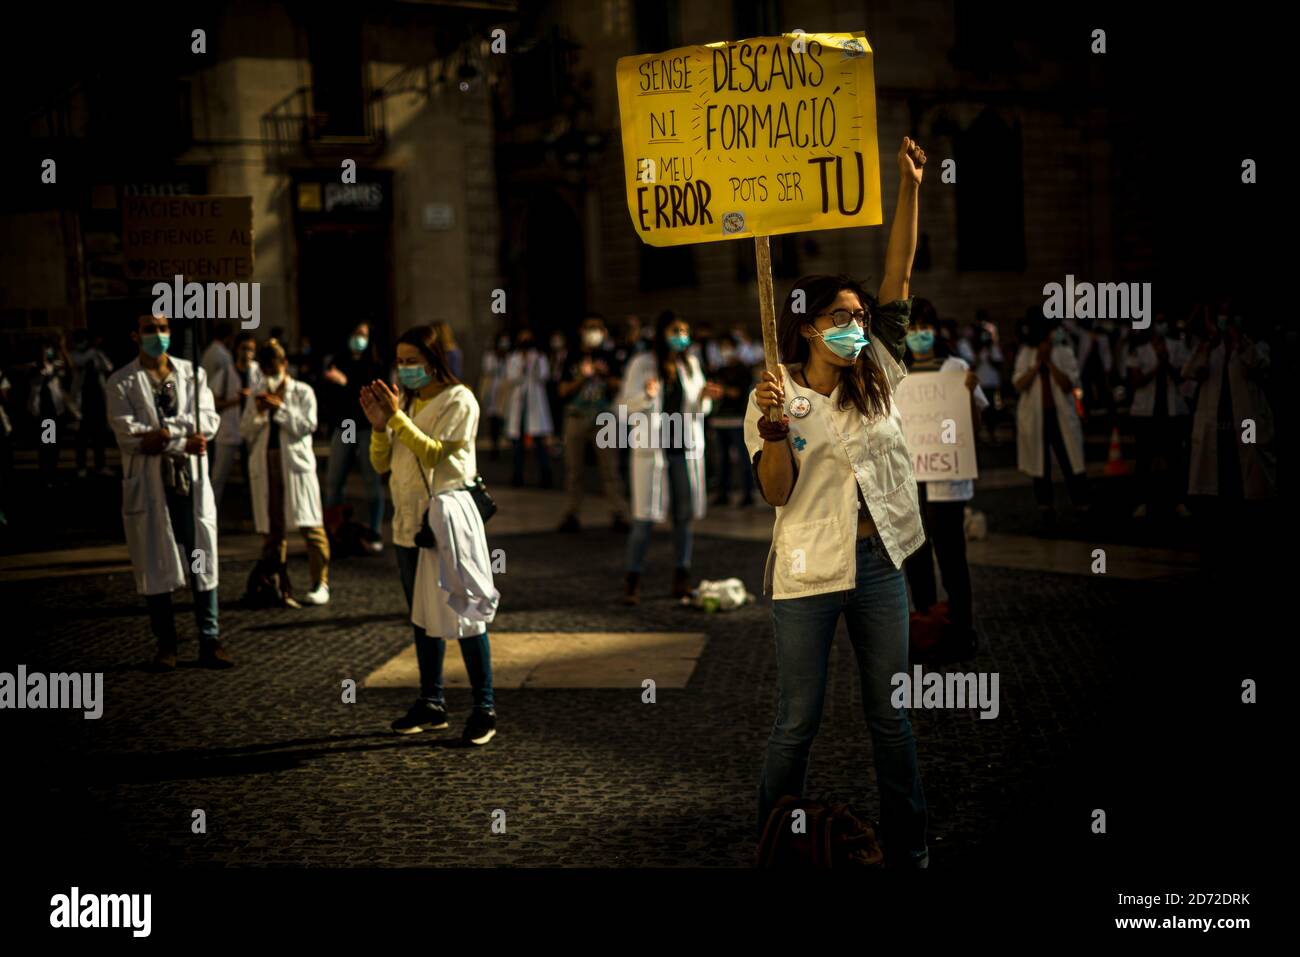 Barcelona, Spain. 20th Oct, 2020. Young resident doctors protest over precarious conditions during their postgraduate training specializing in the health care system due to low wages, high number of working hours and lack of monitoring. Credit: Matthias Oesterle/Alamy Live News Stock Photo